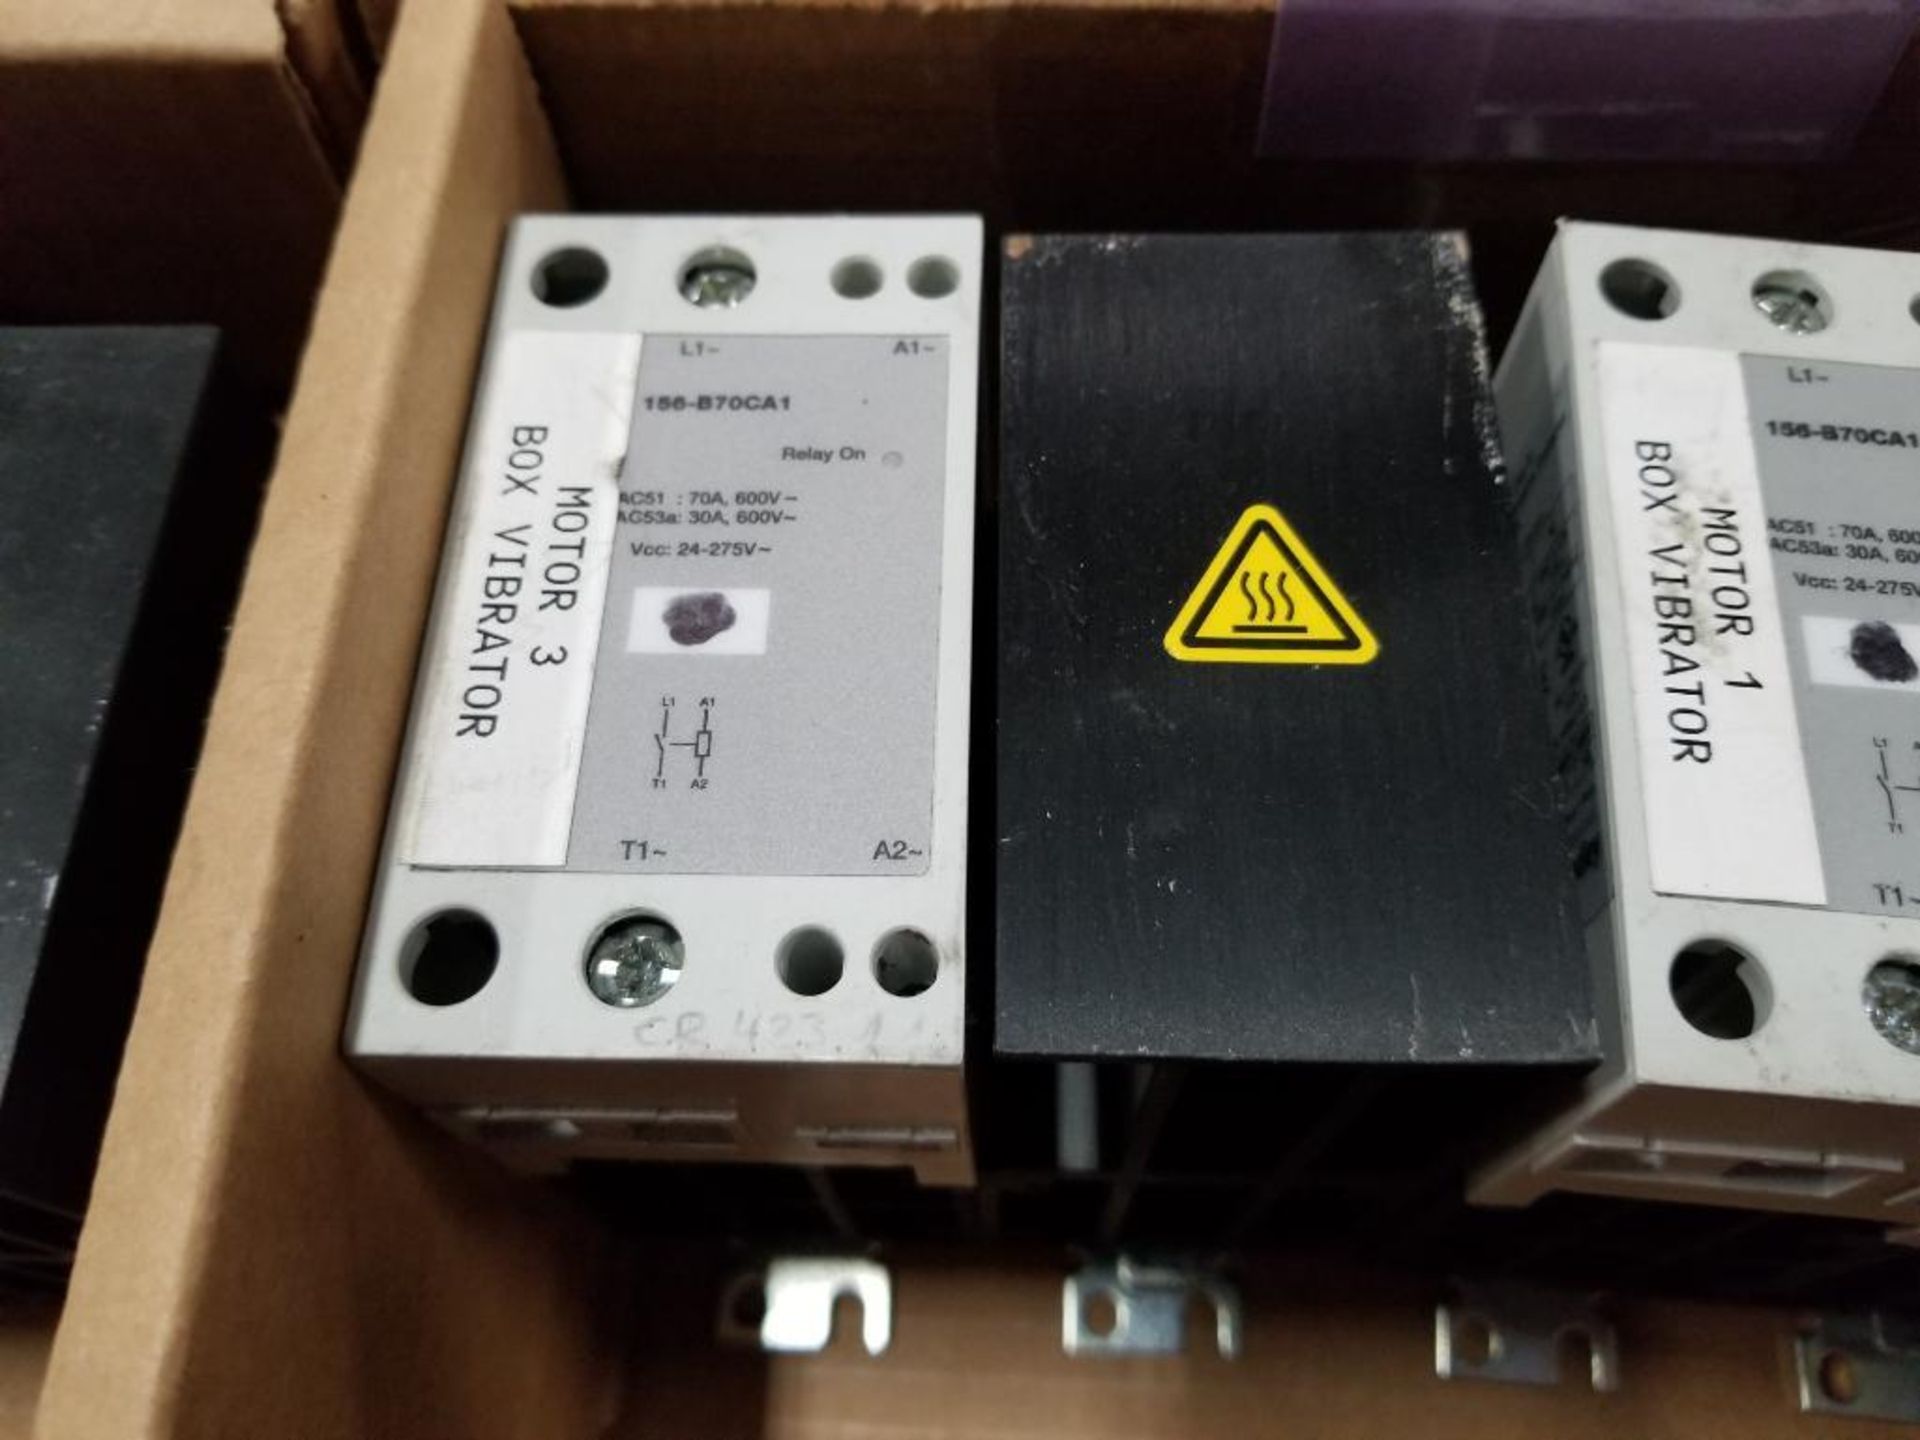 Qty 3 - Allen Bradley 156-B70CA1 semiconductor contactor. - Image 2 of 5